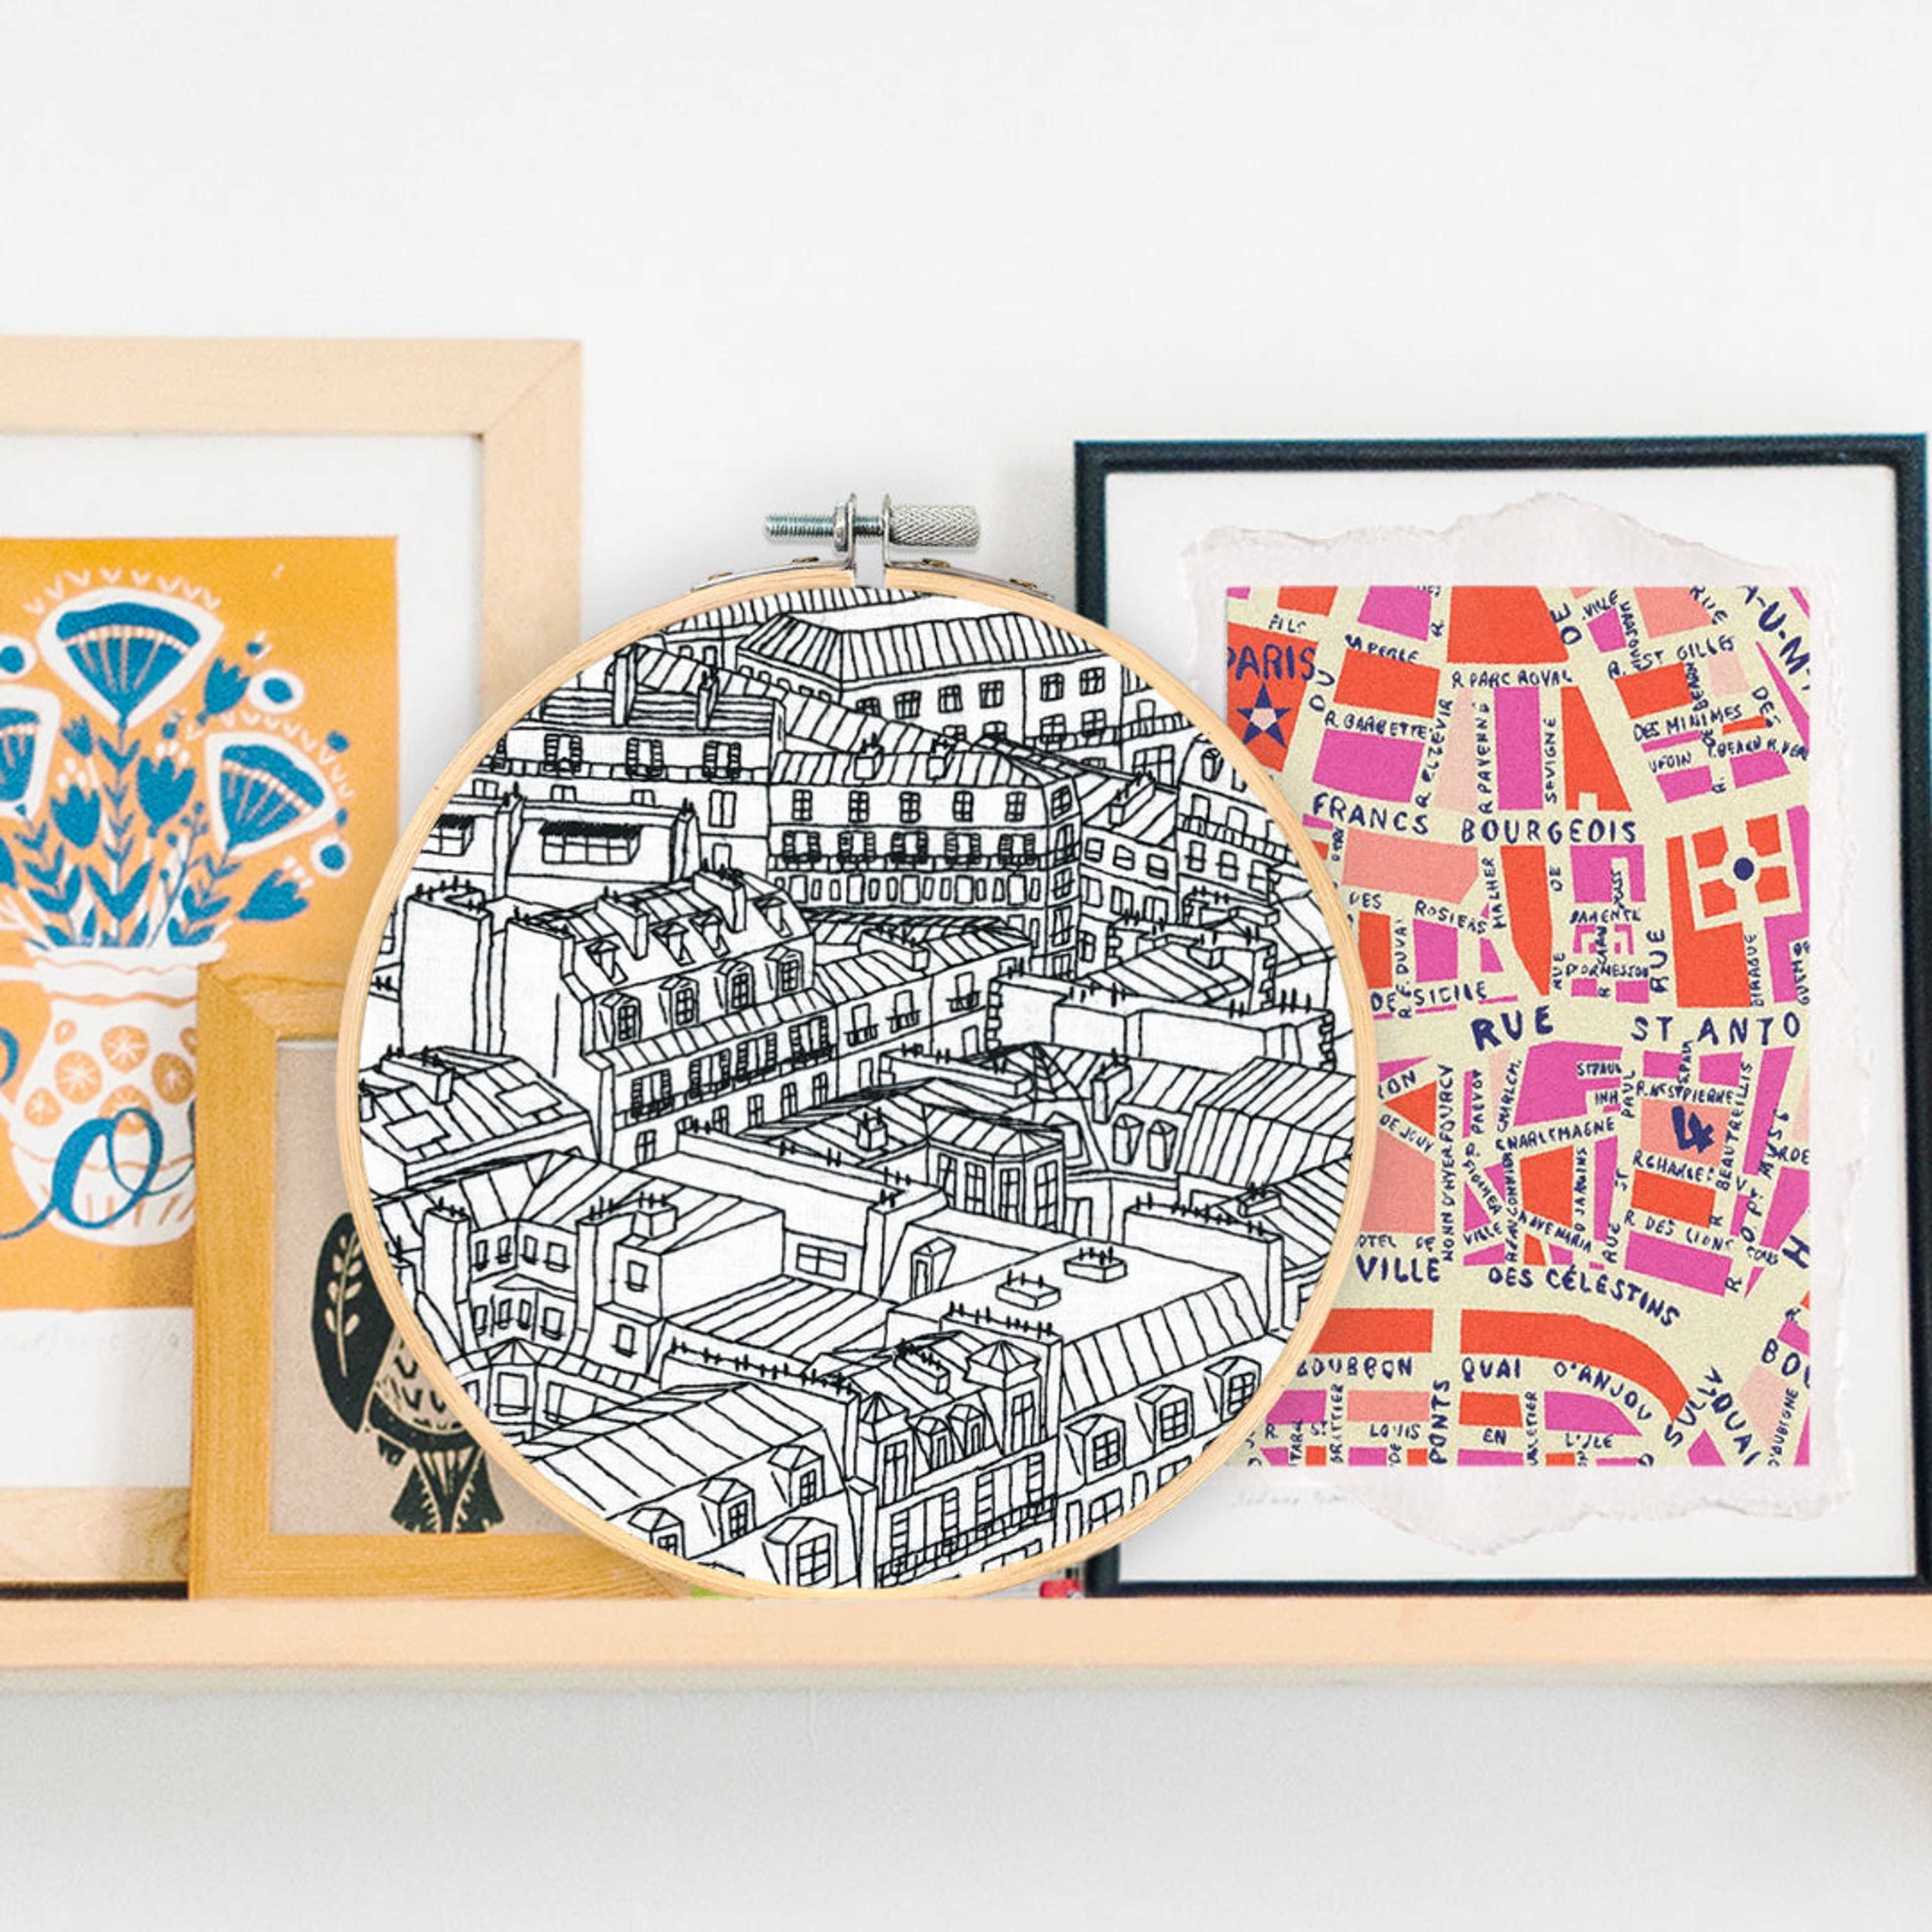 Rooftops of Paris - embroidery kit